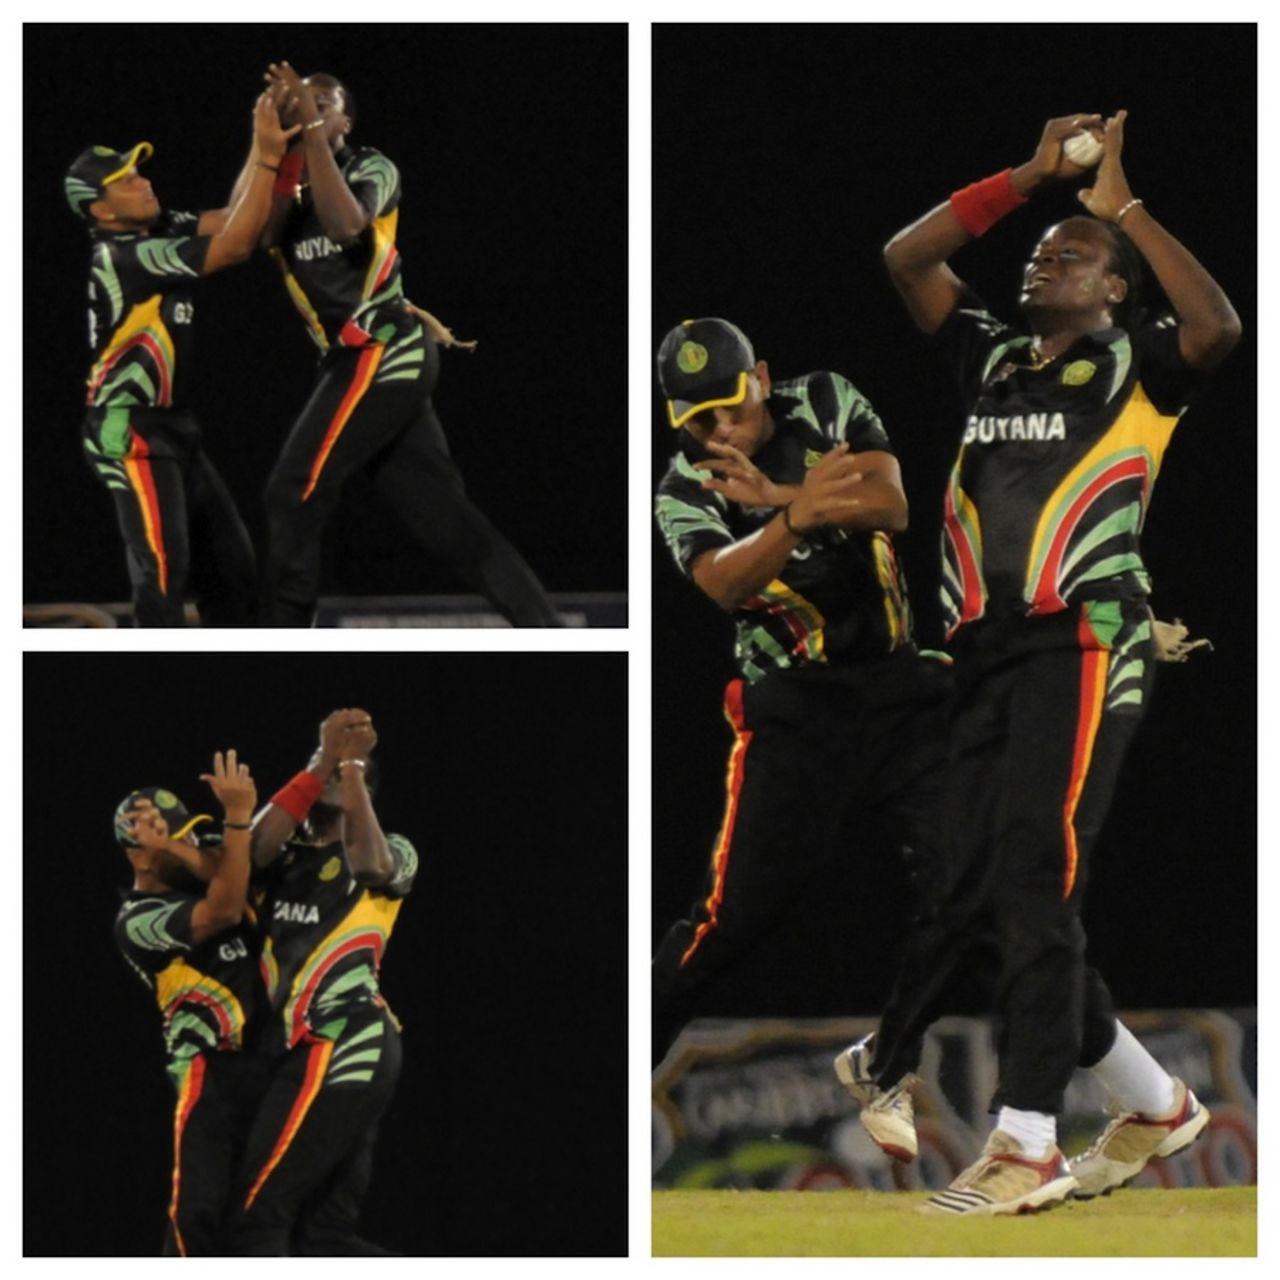 Steven Jacobs takes a catch after colliding with Ramnaresh Sarwan, Barbados v Guyana, Caribbean T20, Trinidad, January 10, 2013